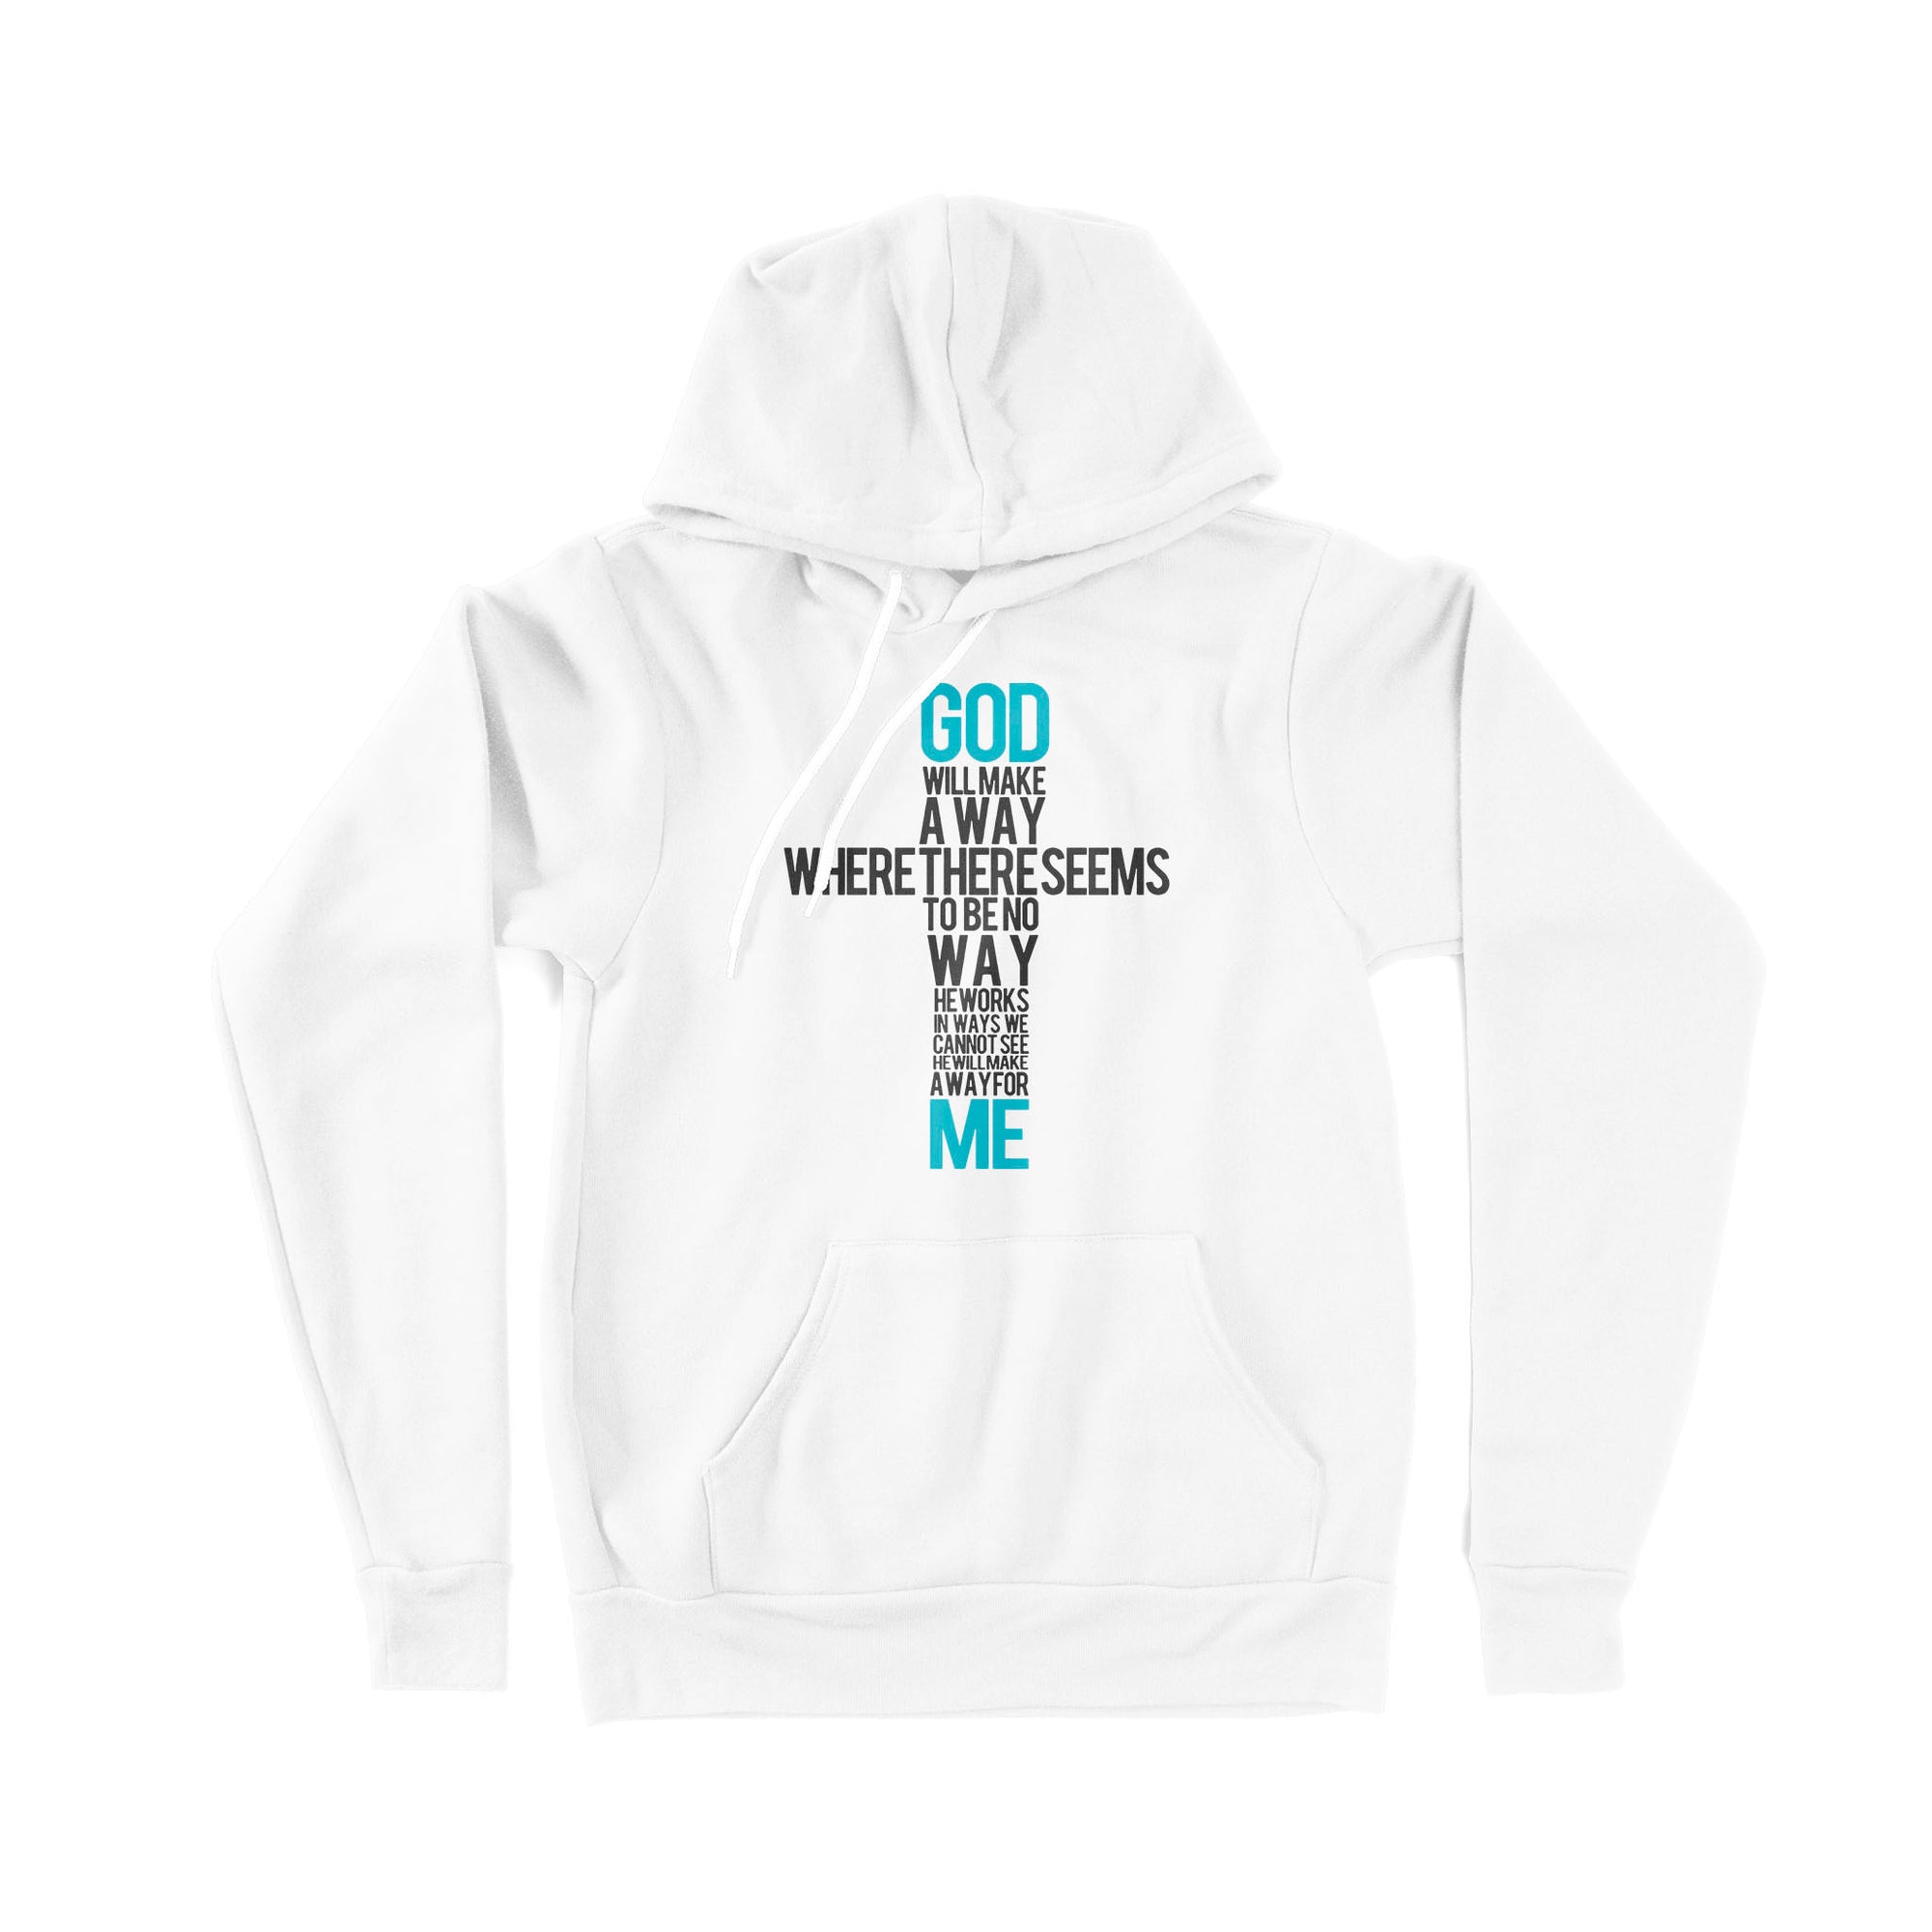 God Will Make A Way When It Seems There Is No Way - Premium Hoodie